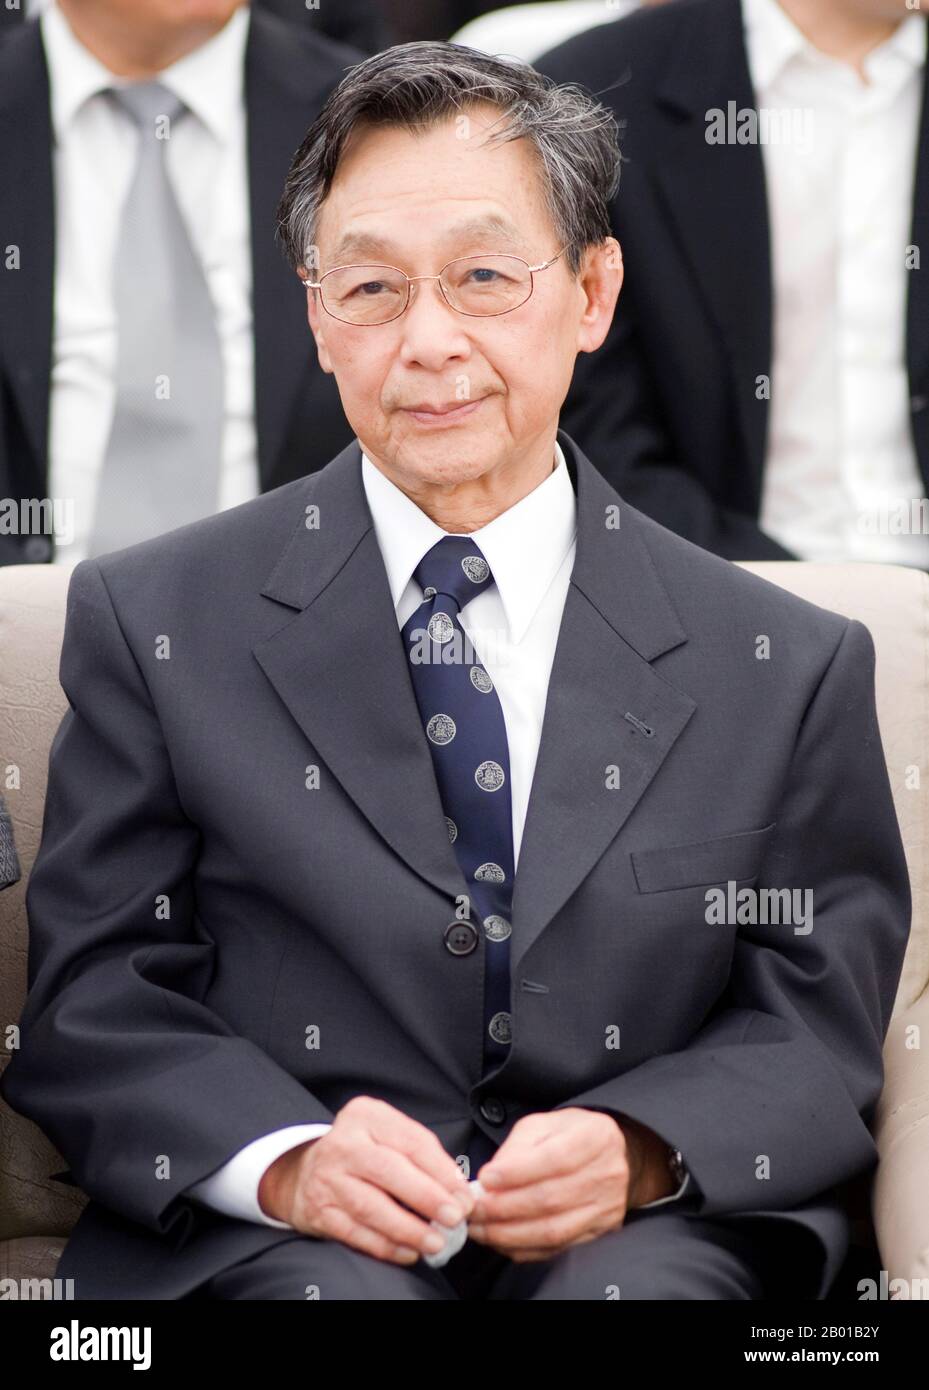 Thailand: Chuan Leekpai (28 July 1938 - ), Prime Minister of Thailand (r. 1992-1995, 1997-2001). Photo by Govt. of Thailand (CC BY 2.0 License), 2010.  A third-generation Thai Chinese, Chuan was born in Trang province. As the leader of the Democrat Party, Chuan was elected in 1992 after the abortive coup by General Suchinda Kraprayoon, thus becoming Thailand's first prime minister to come to power without either aristocratic or military backing.  His first administration consisted of a five party coalition of the Democrat, New Aspiration, Palang Dhamma, Social Action and Social Unity Parties. Stock Photo